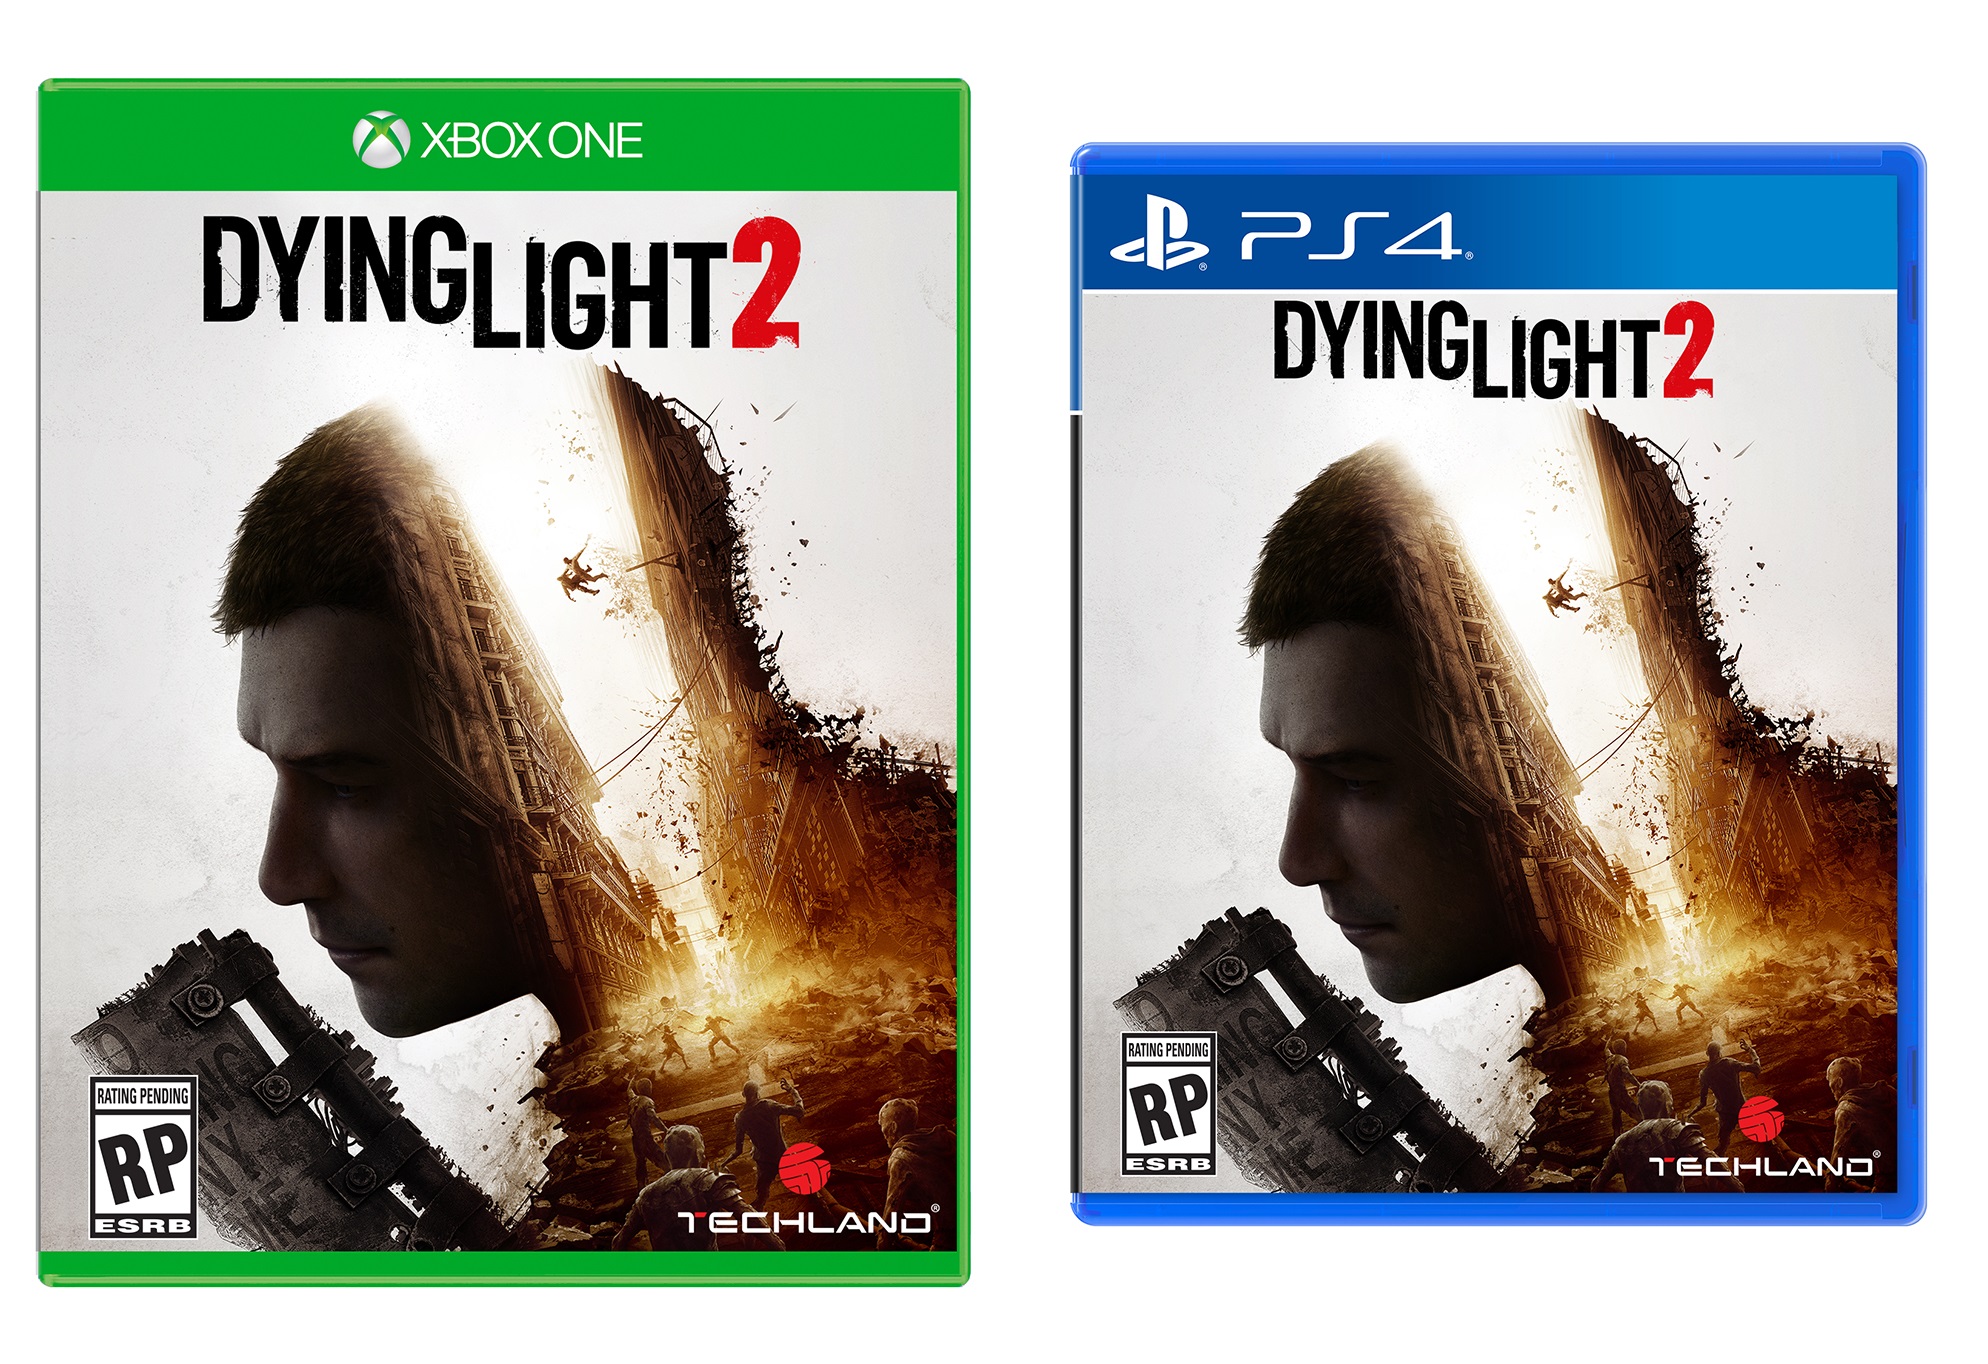 dying light 2 price ps5